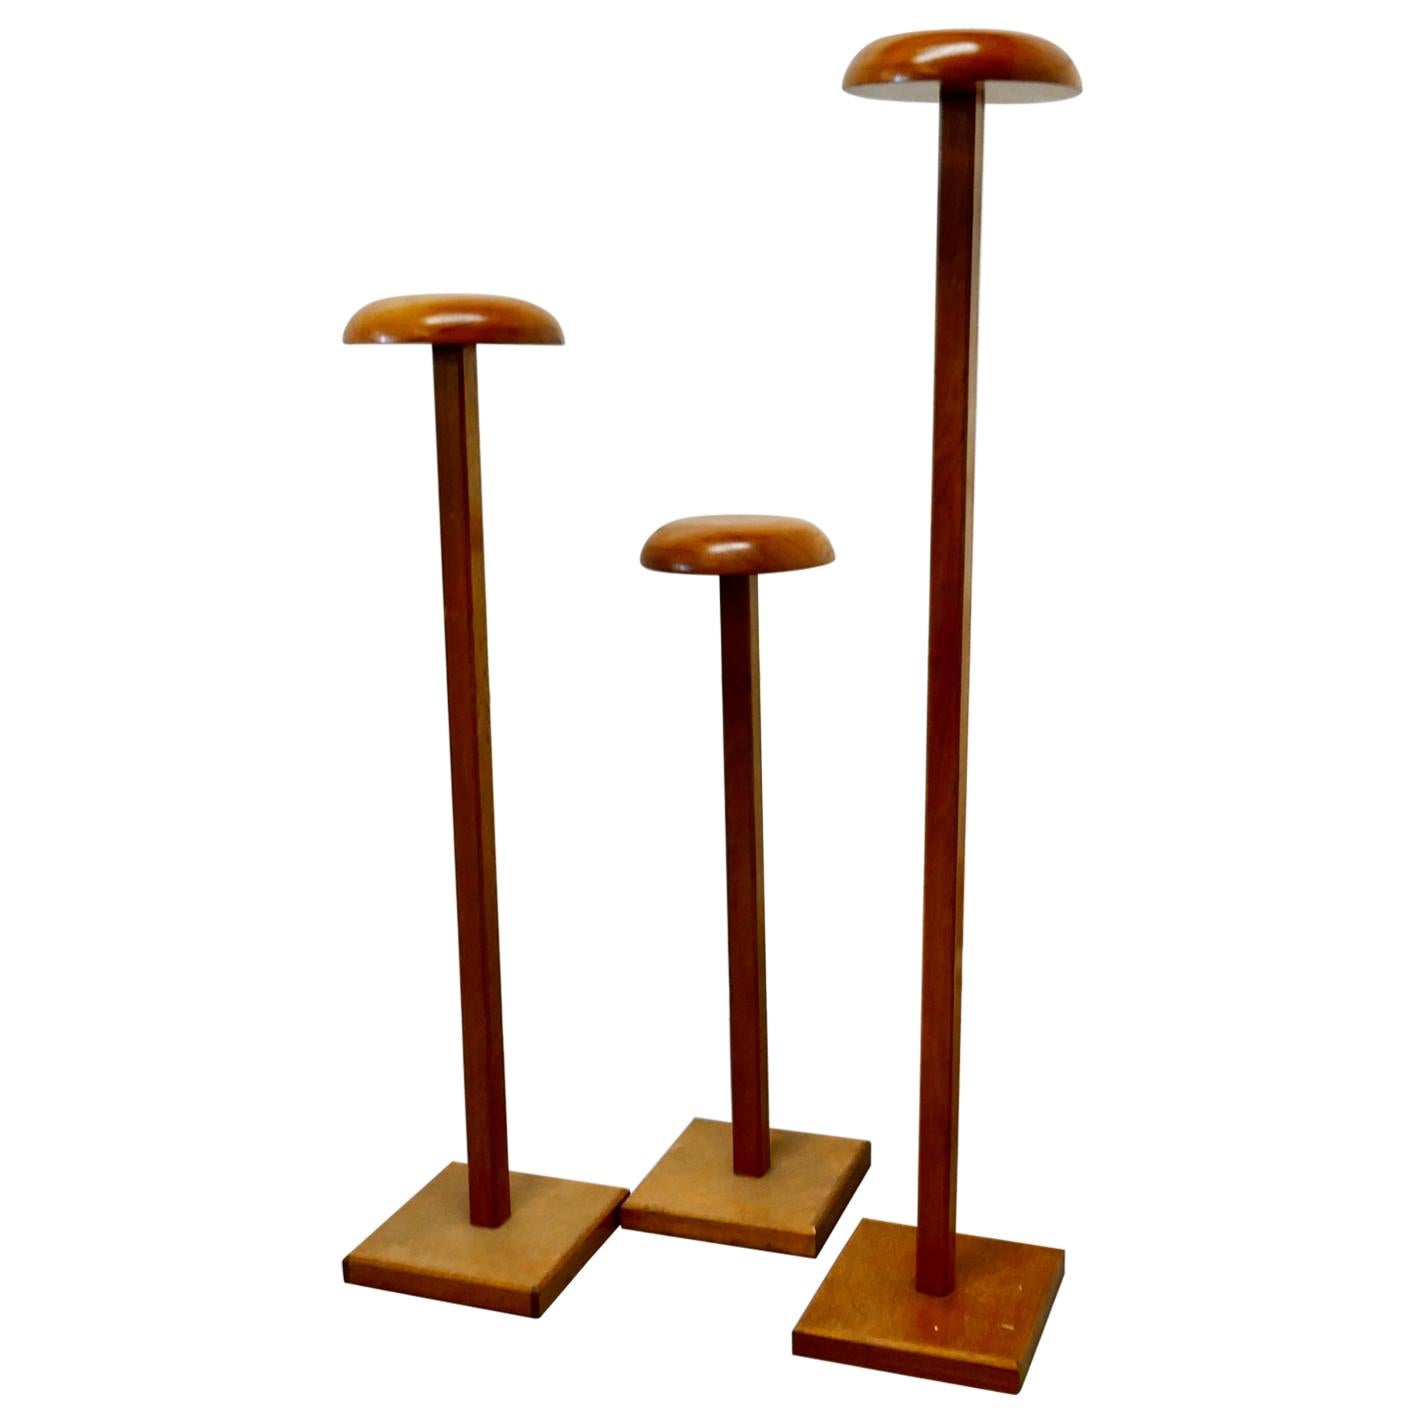 Set of 3 Very High Taylor’s Wooden Fabric Display Shop Stands